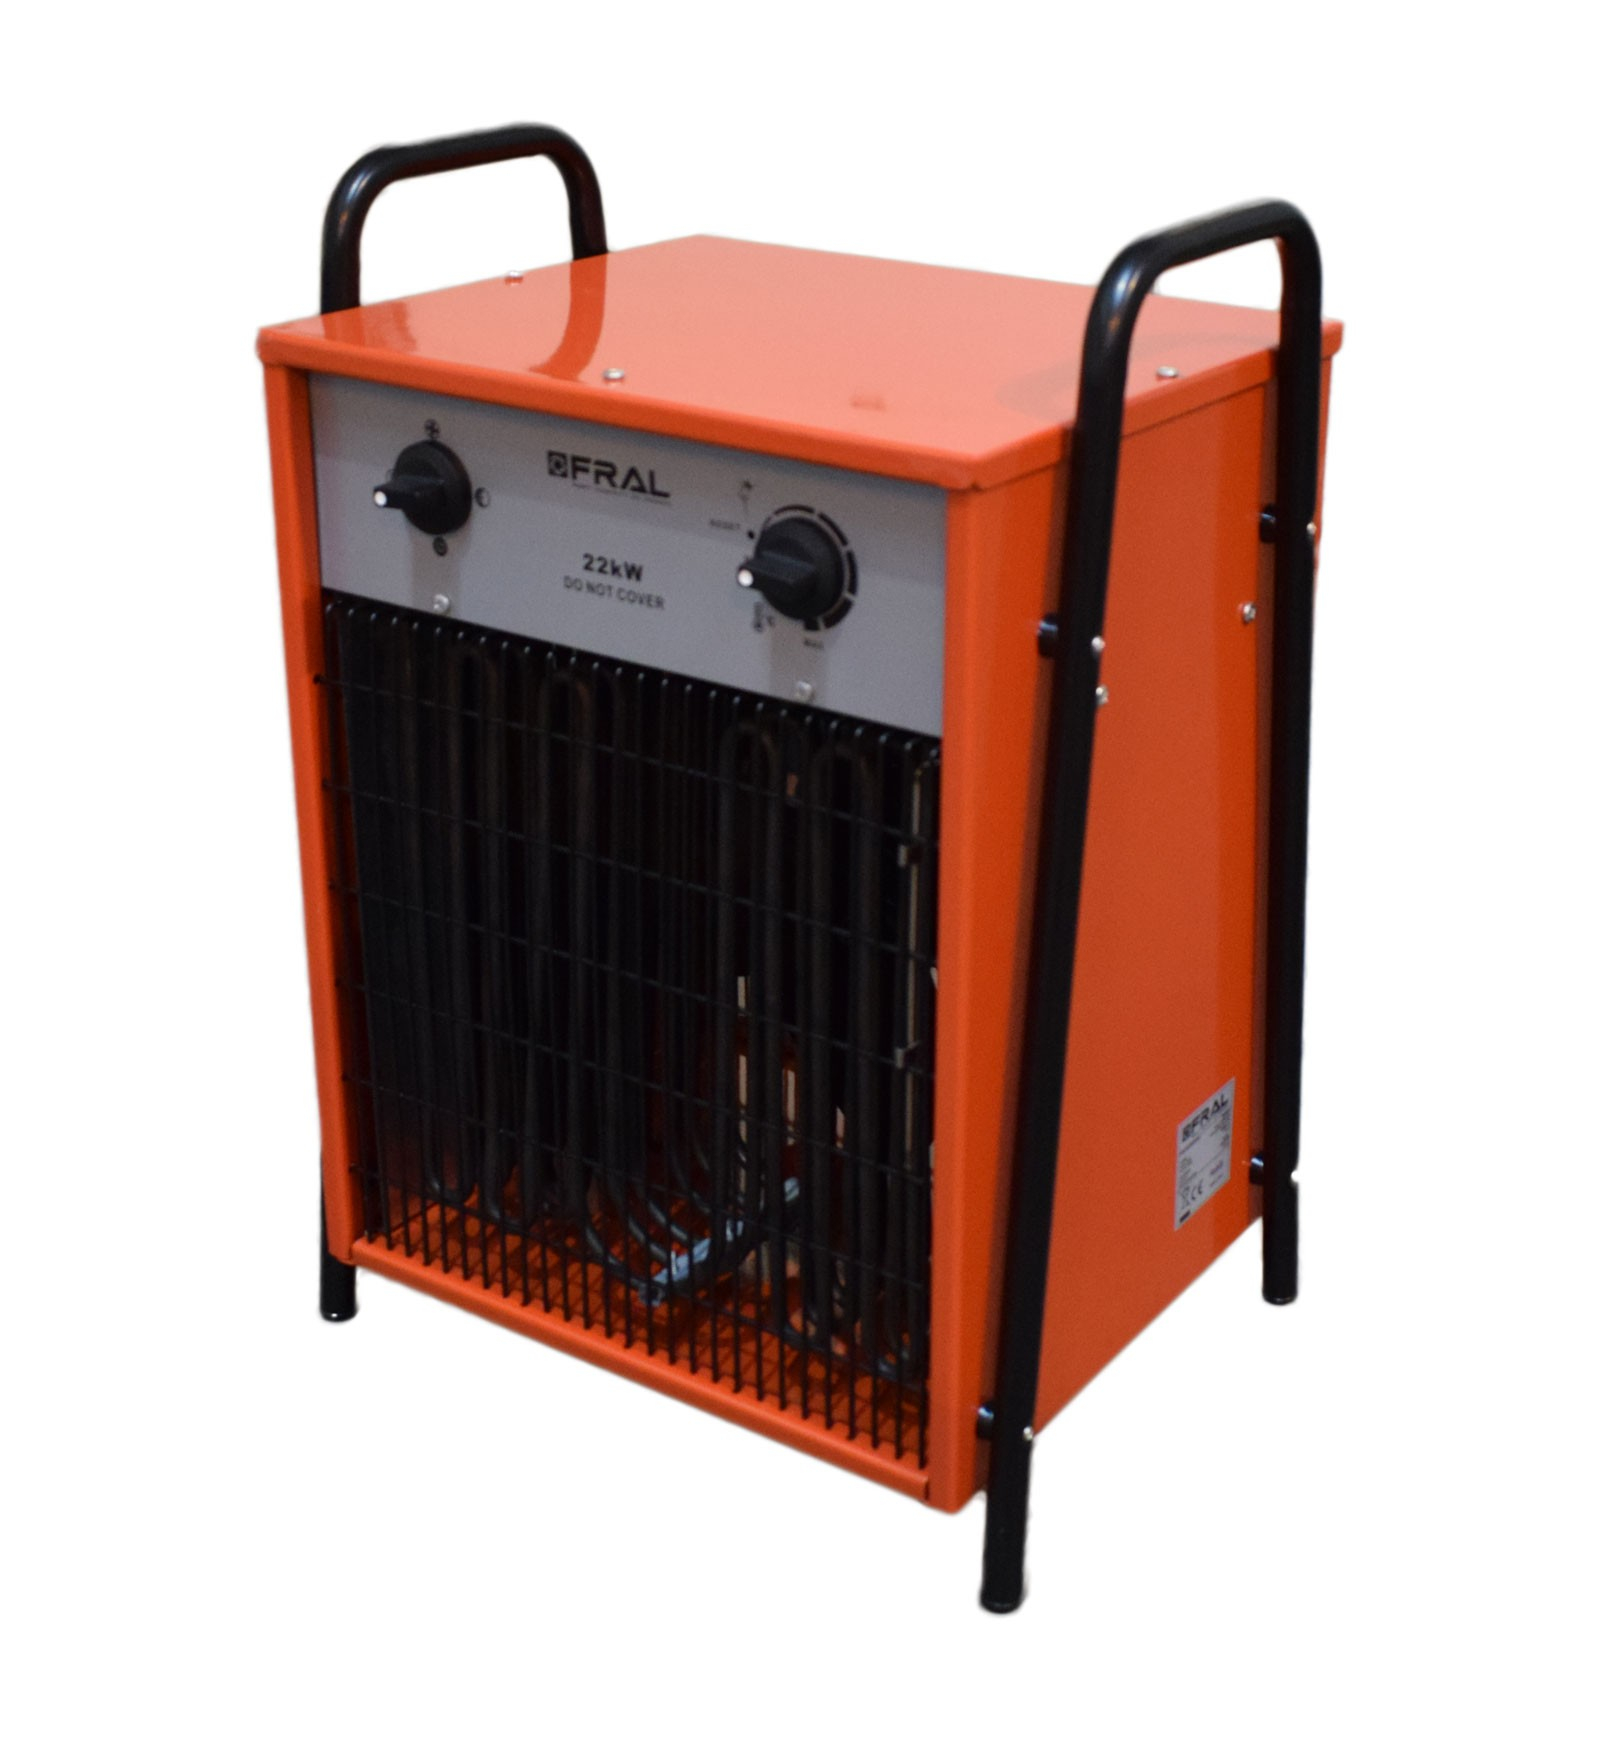 Fral Feh220 22kw Portable Fan Heater With An Adjustable Thermostat with dimensions 1600 X 1739